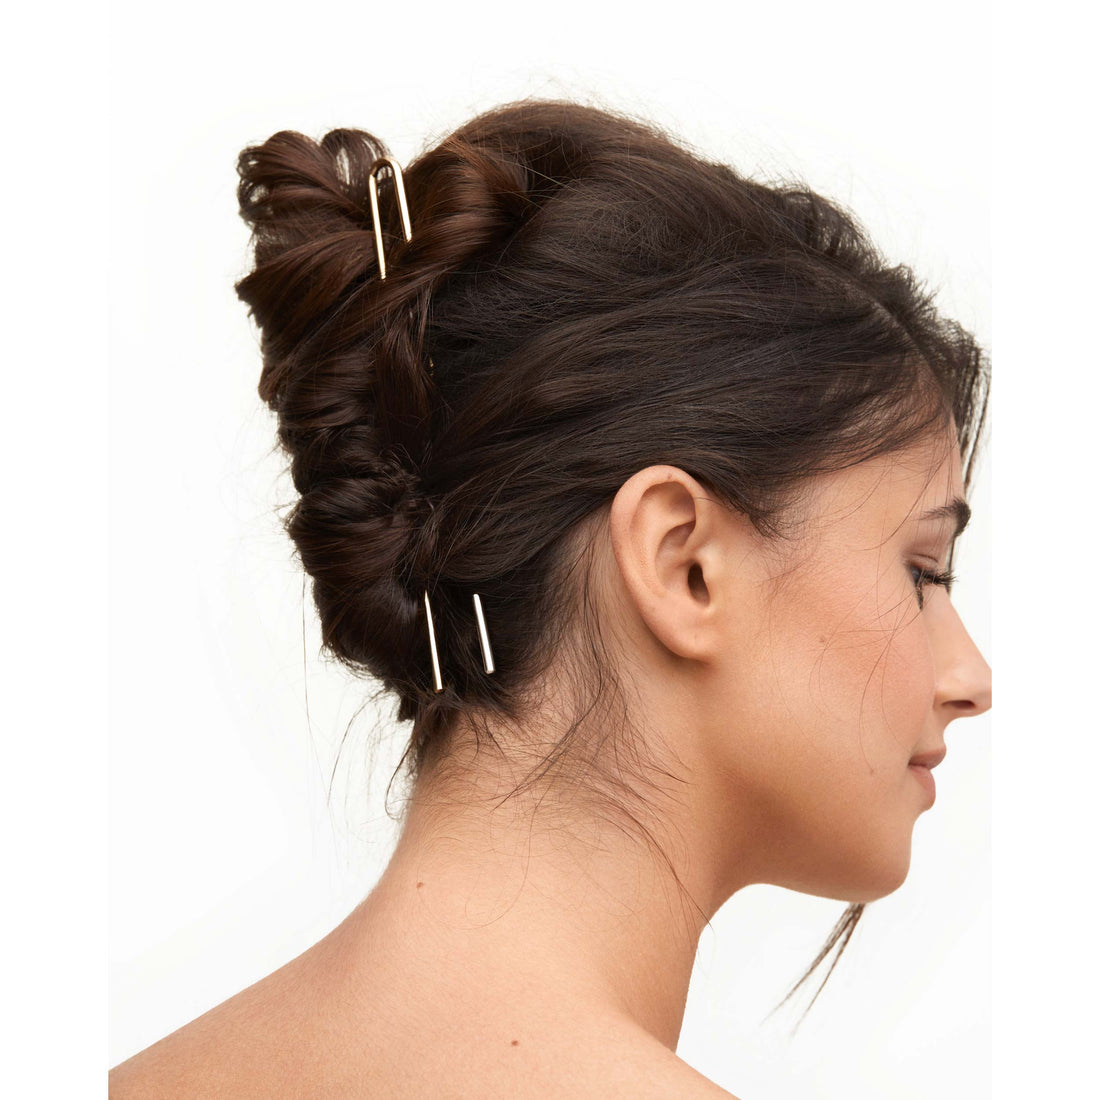 Stylish Large Gold Hair Pin: Find the Perfect Hair Accessory for You ...